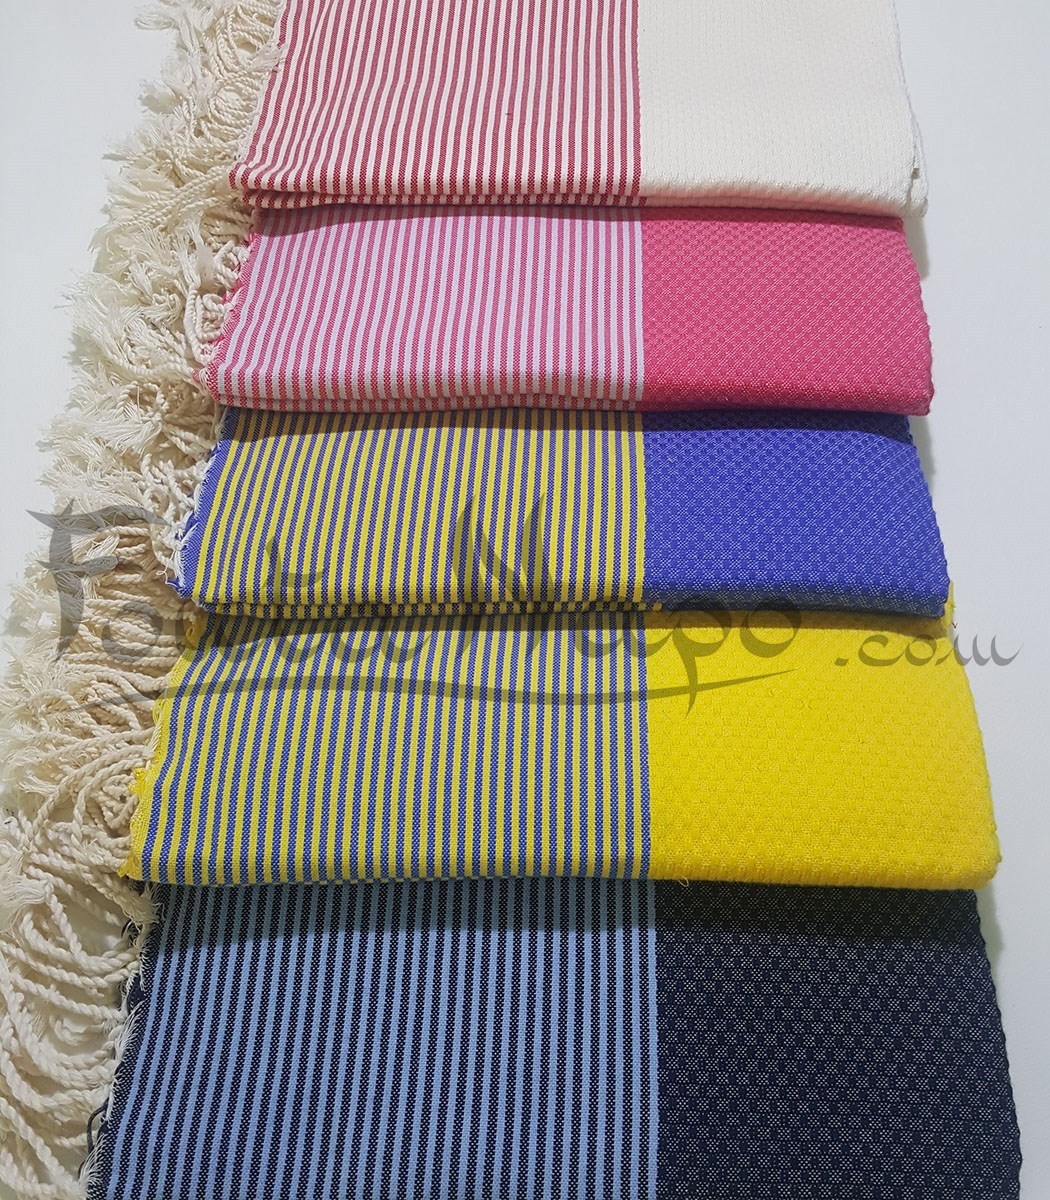 Foutas Towel Honeycomb with thin stripes